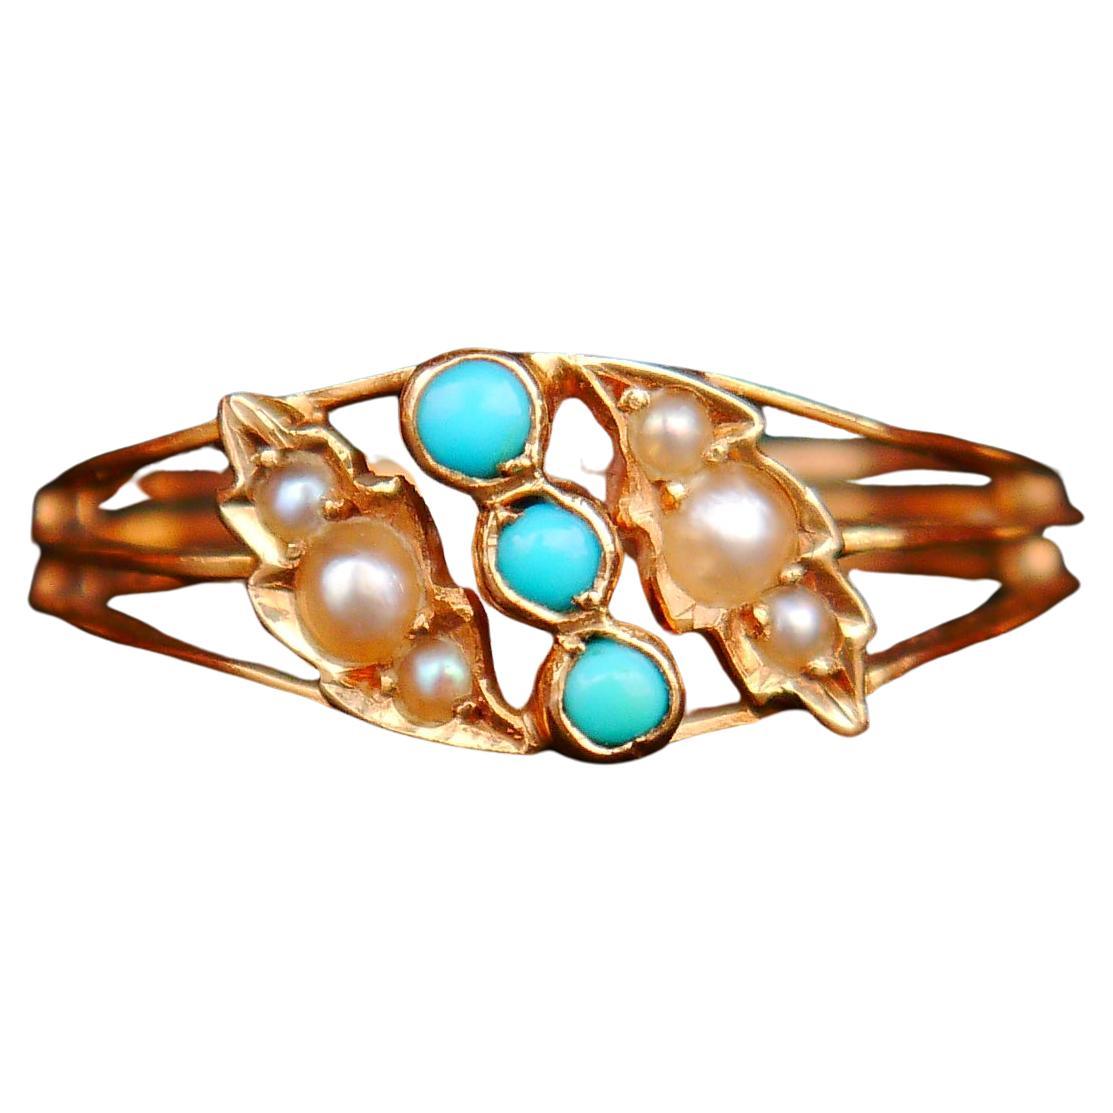 1907 Nordic Ring Blue Turquoise Seed Pearls solid 18K Gold ØUS5.25 /1.4gr